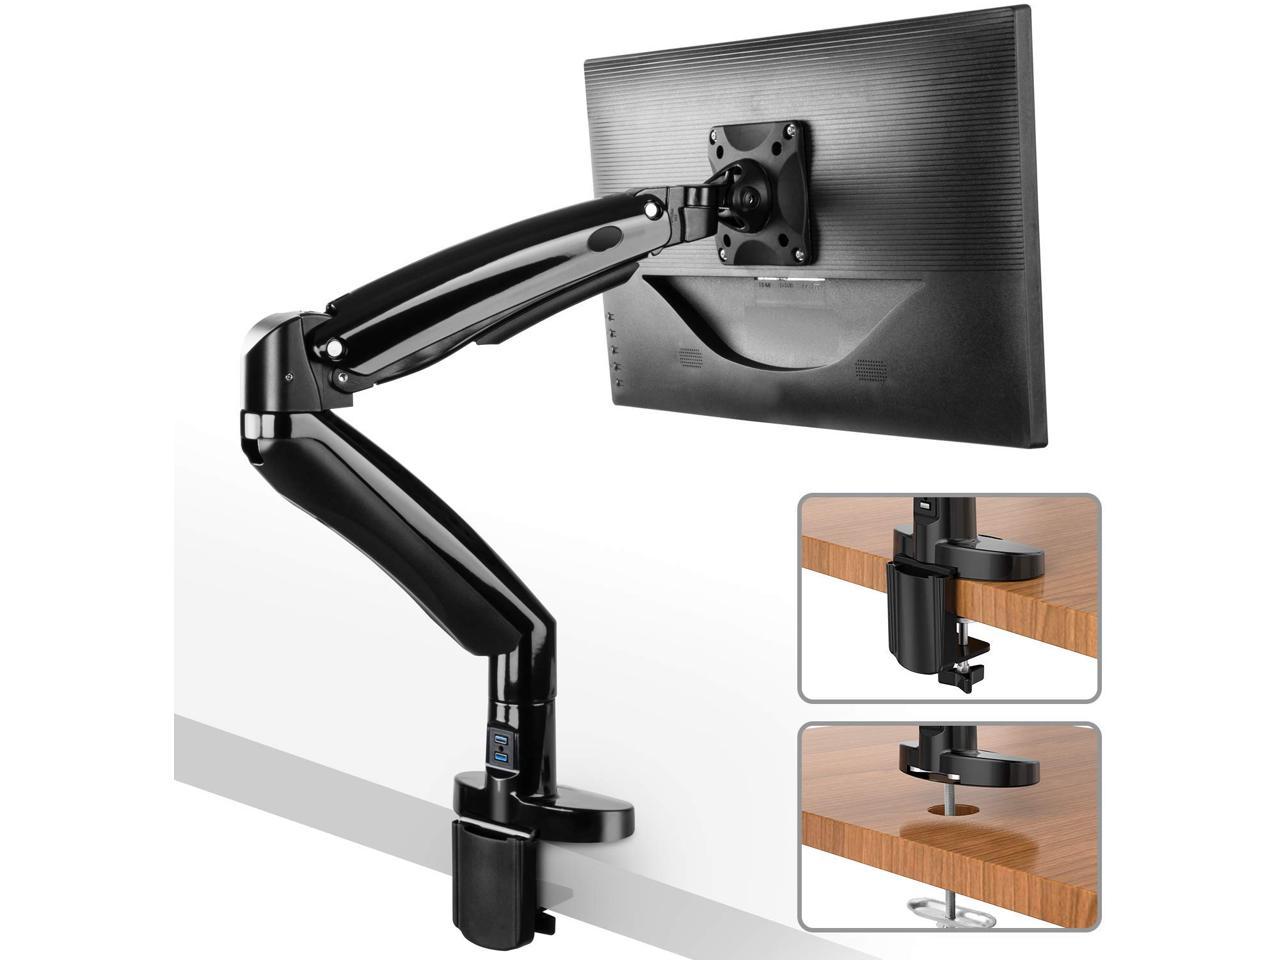 2 Mounting Options 360° Rotation Full Adjustment Gas Spring Monitor Arm HUANUO 17” Support VESA 75/100 mm & Weight up to 12 KG 35” Single Monitor Arm for LED LCD Screens 